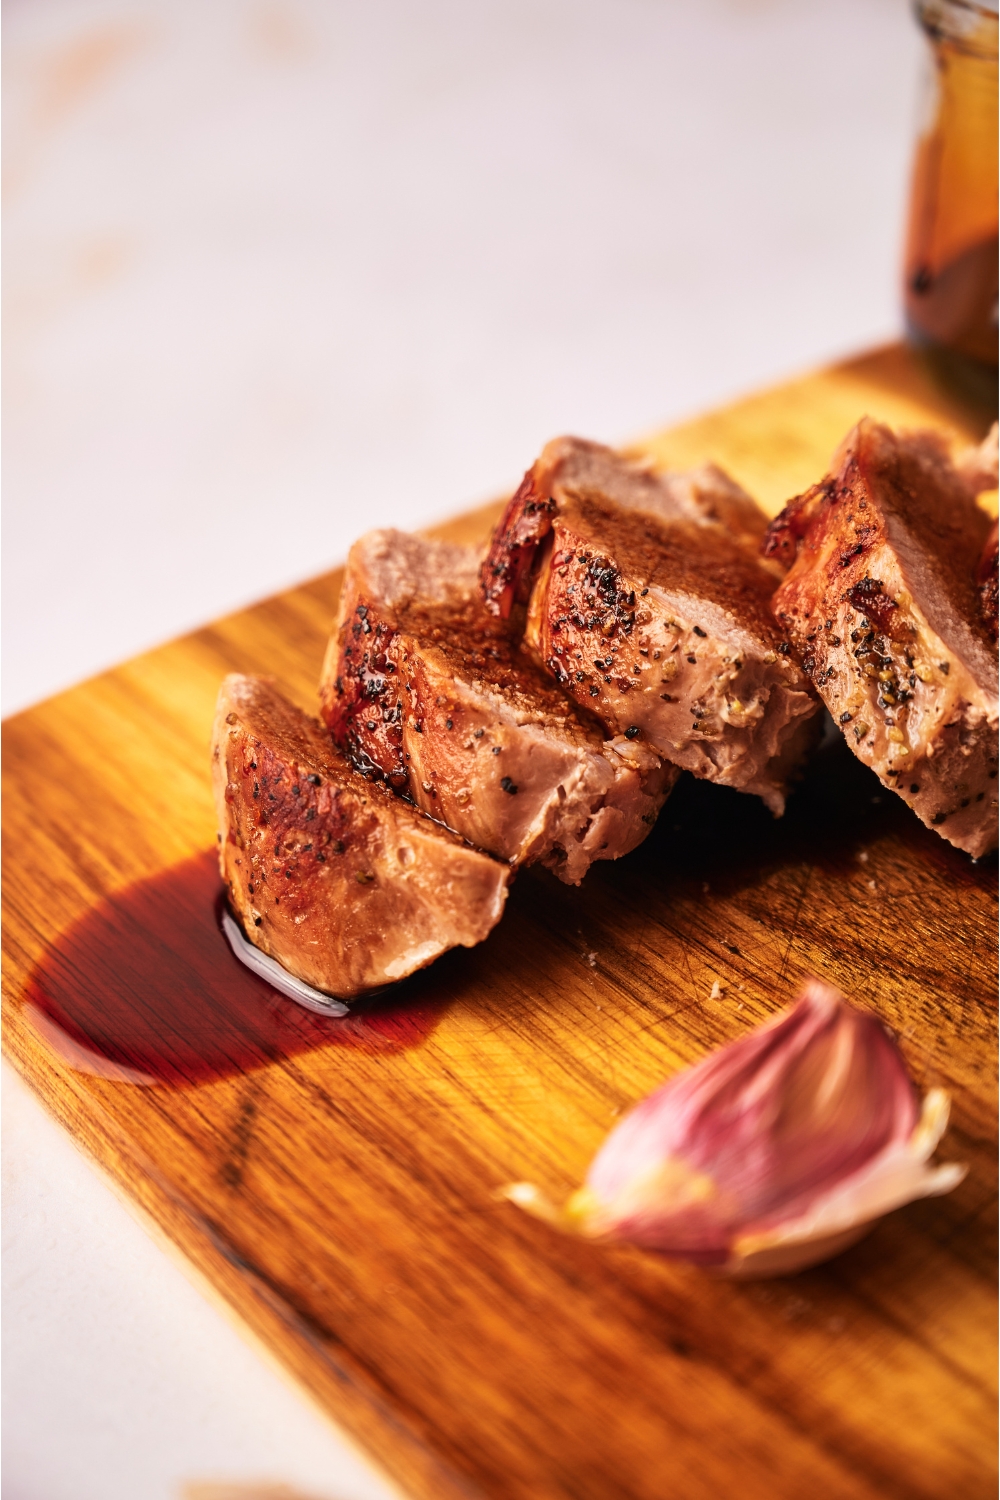 Close up of cooked pork tenderloin coated in a brown sauce atop a wood cutting board.